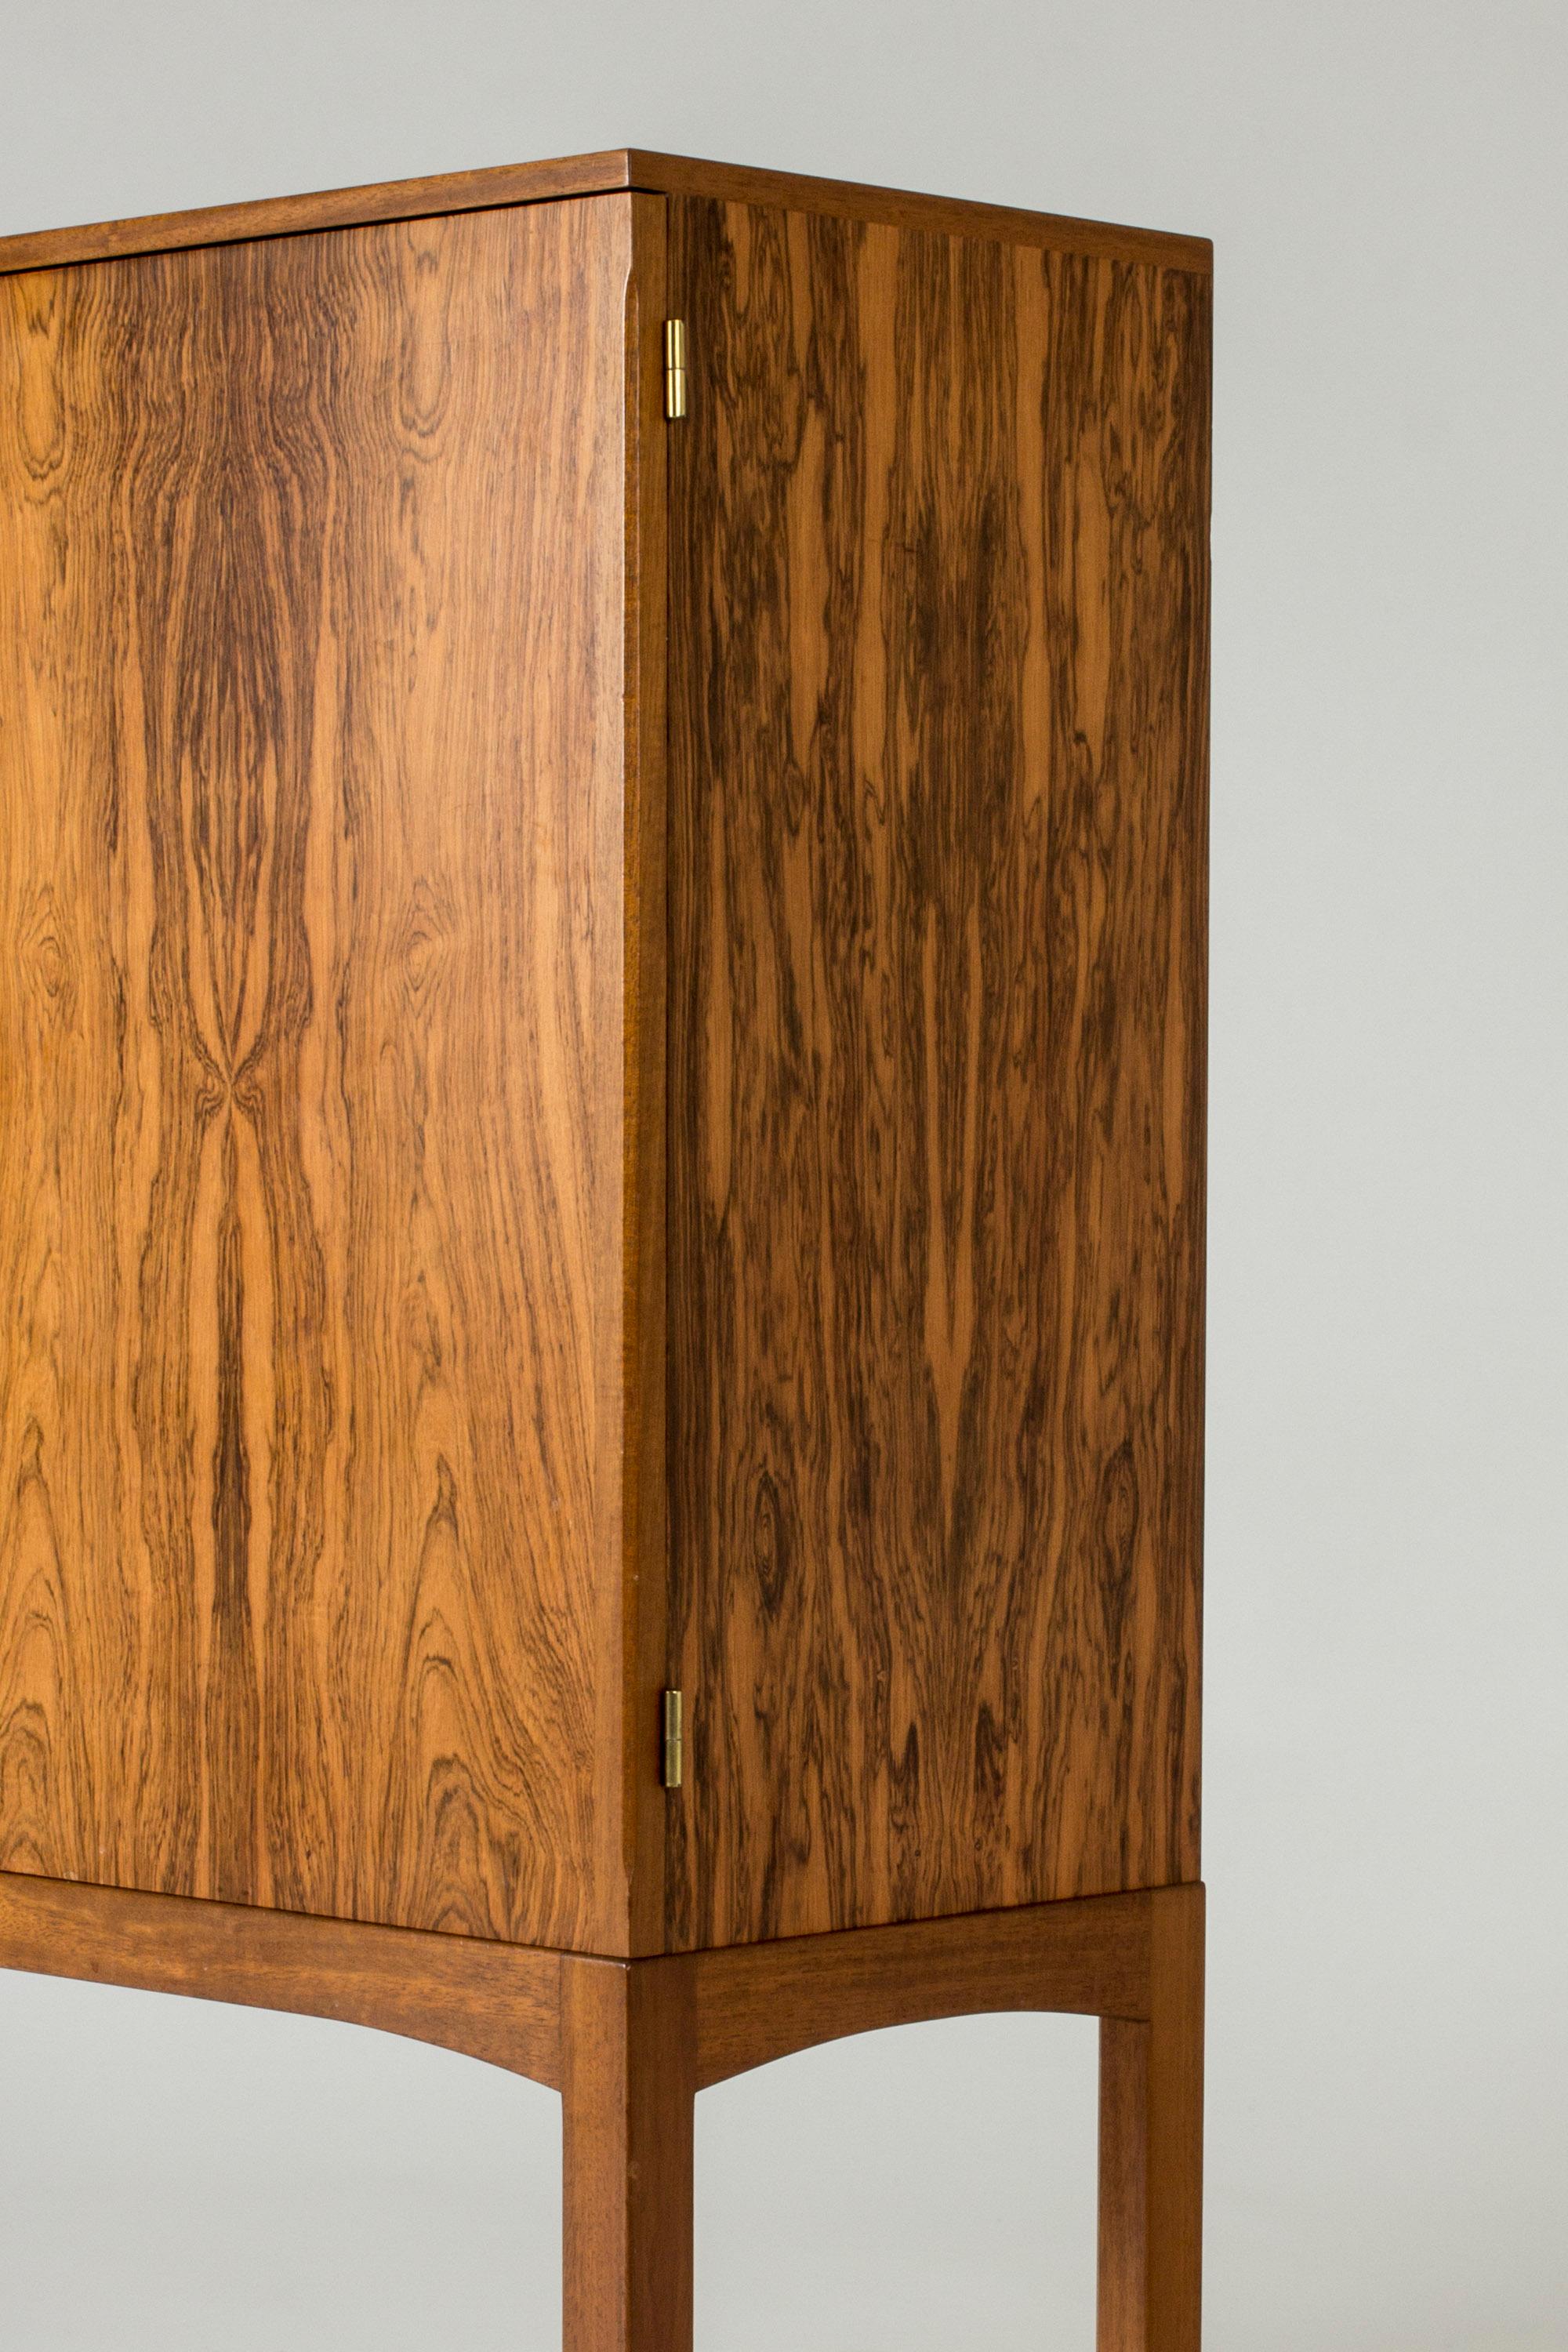 Mid-20th Century Modernist Rosewood Cabinet, Sweden, 1950s